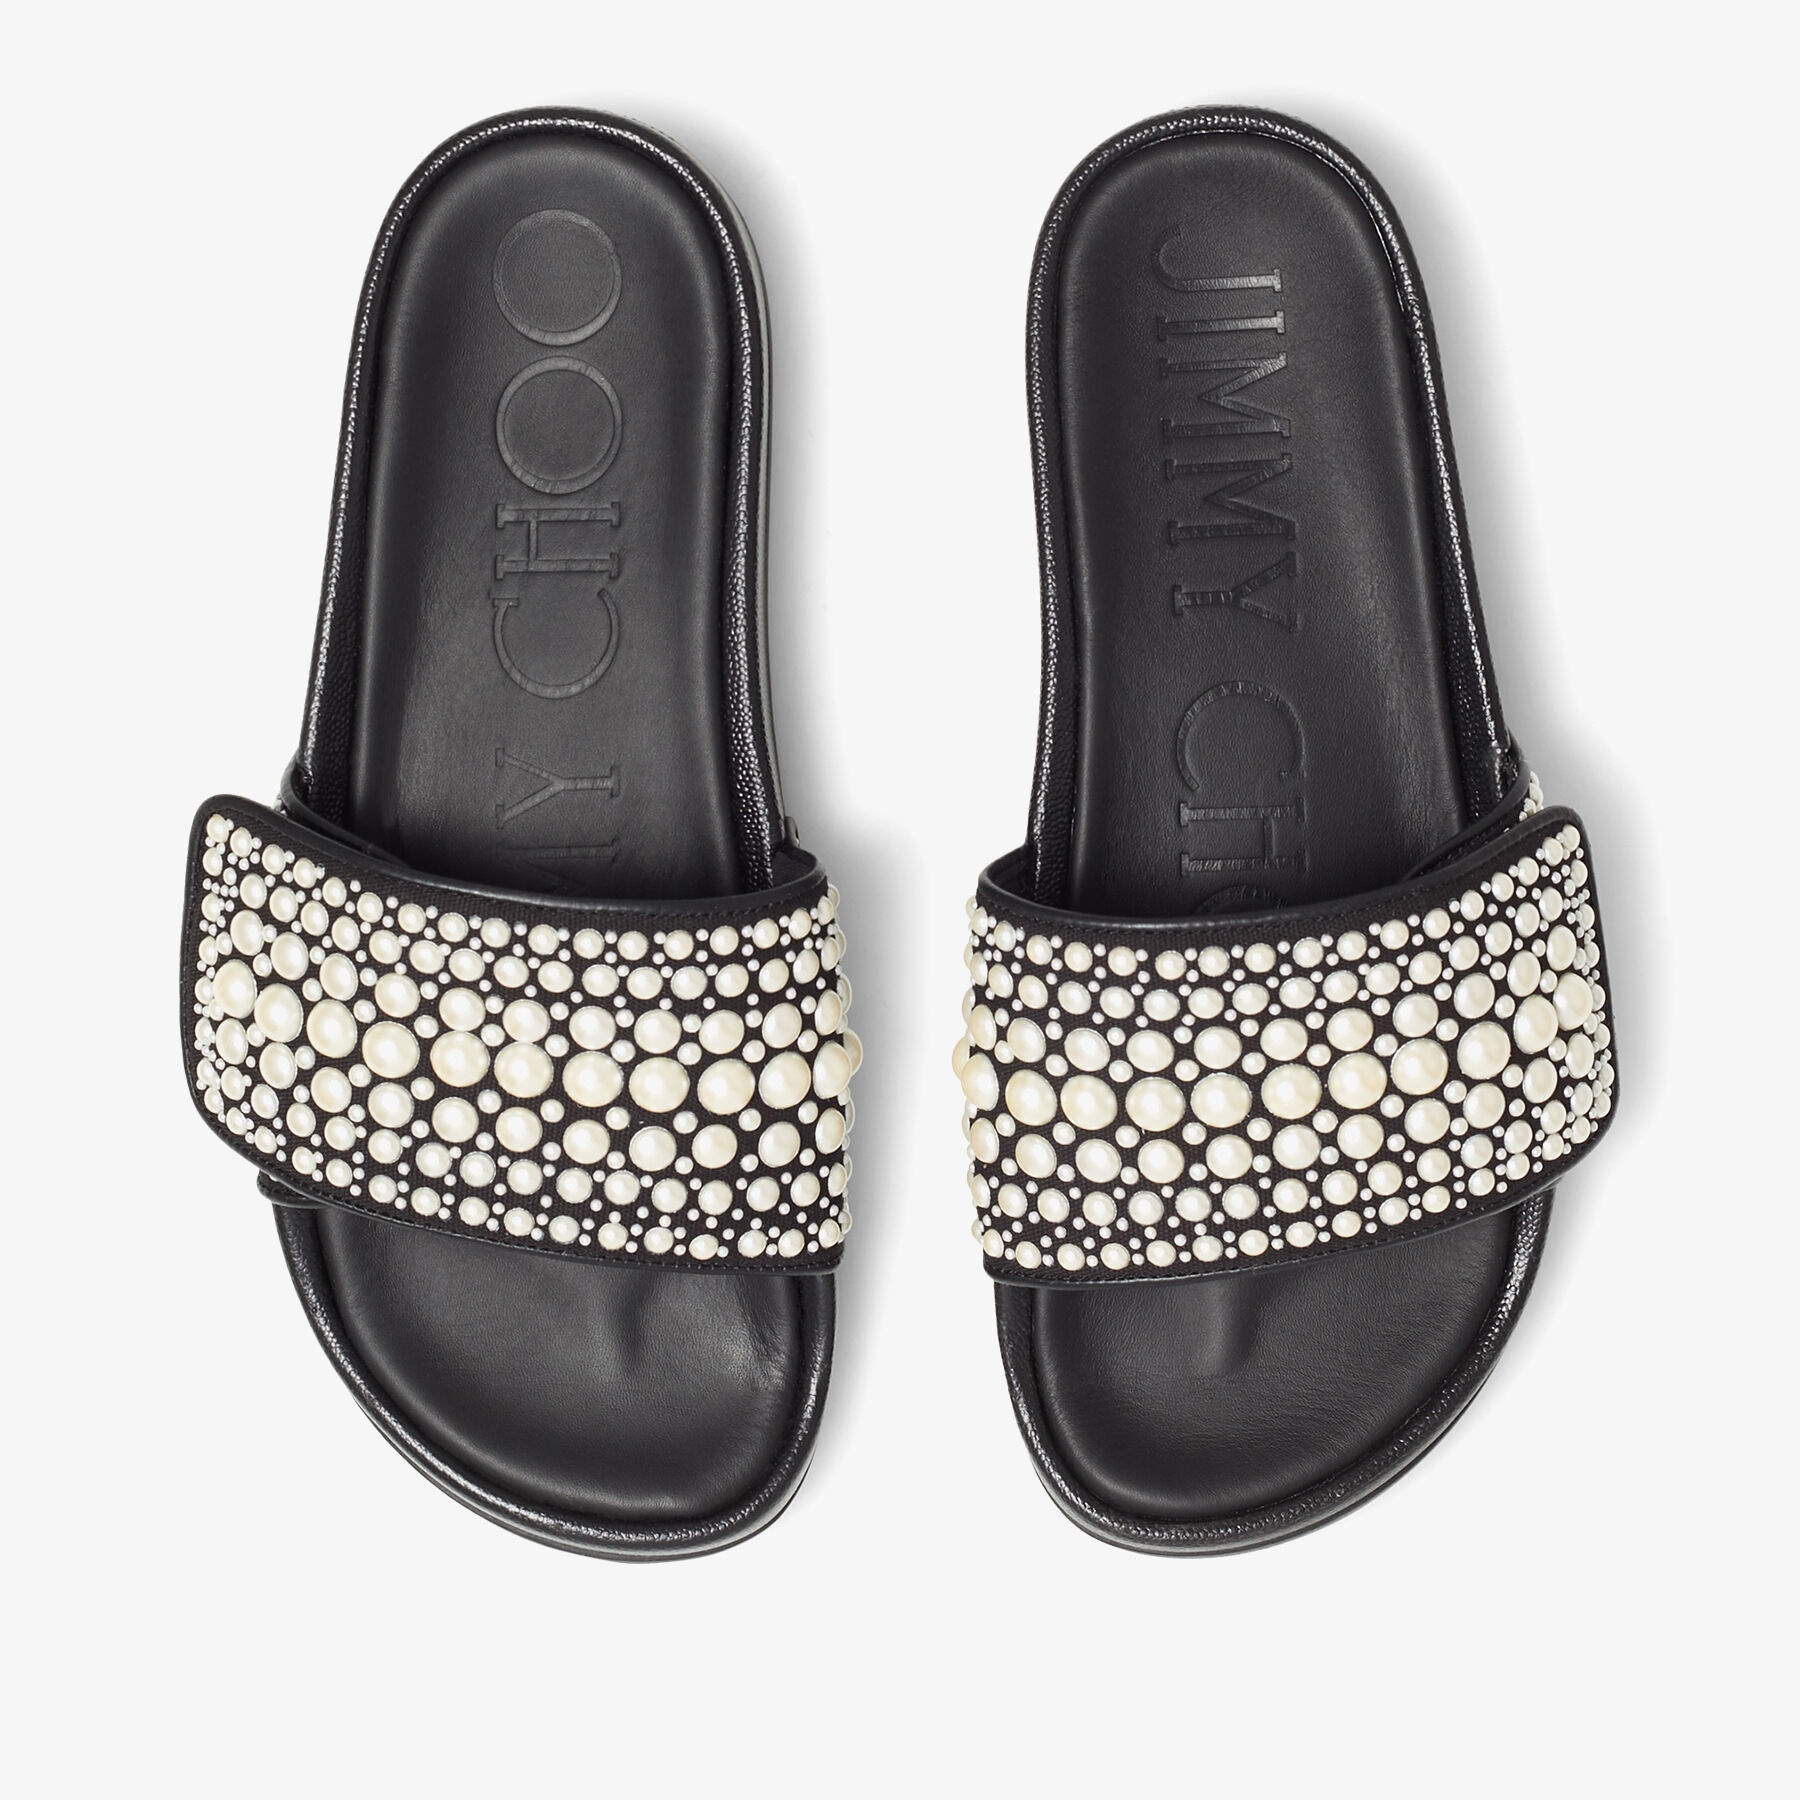 Fitz/F
Black Canvas and Leather Slides with Pearls - 5